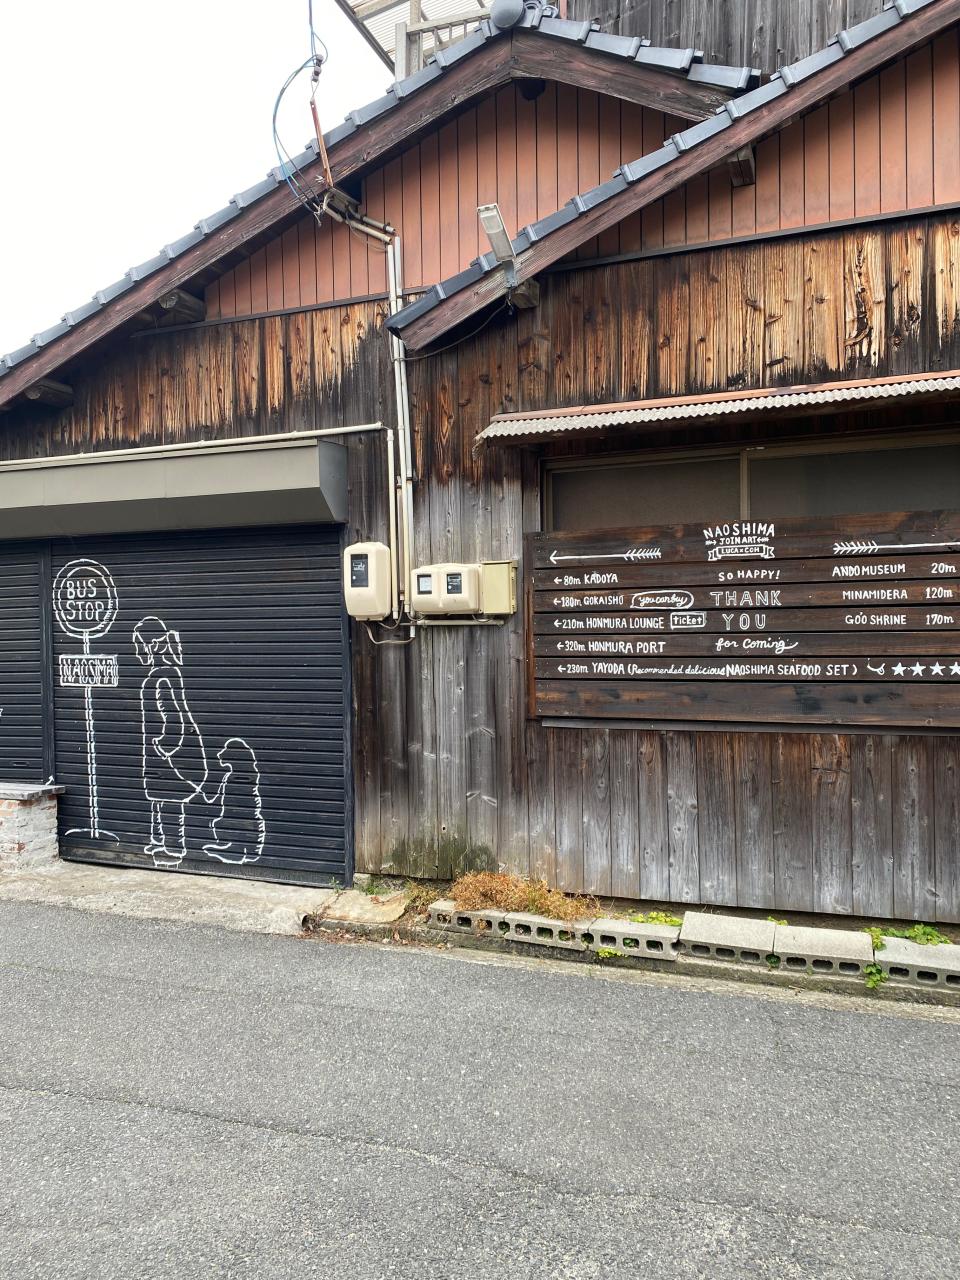 Storefronts in Naoshima, Japan, Kennedy Hill, "I Spent a Day Exploring One of Japan's Art Islands."